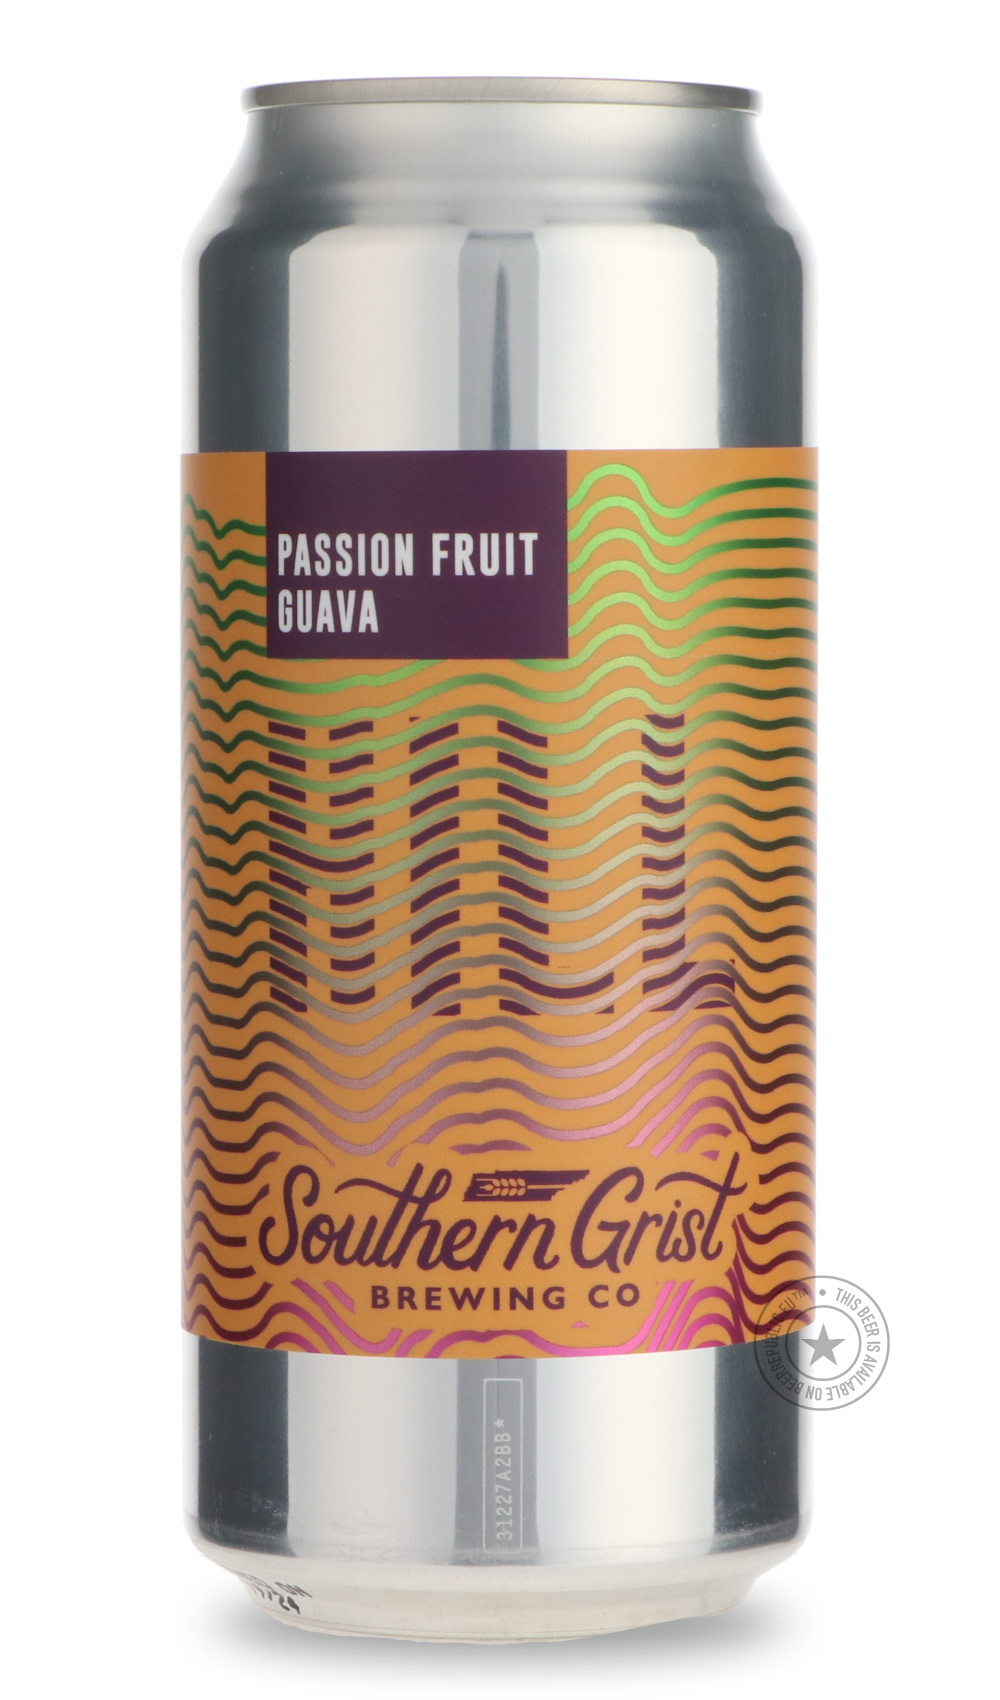 -Southern Grist- Passion Fruit Guava Hill-Sour / Wild & Fruity- Only @ Beer Republic - The best online beer store for American & Canadian craft beer - Buy beer online from the USA and Canada - Bier online kopen - Amerikaans bier kopen - Craft beer store - Craft beer kopen - Amerikanisch bier kaufen - Bier online kaufen - Acheter biere online - IPA - Stout - Porter - New England IPA - Hazy IPA - Imperial Stout - Barrel Aged - Barrel Aged Imperial Stout - Brown - Dark beer - Blond - Blonde - Pilsner - Lager -